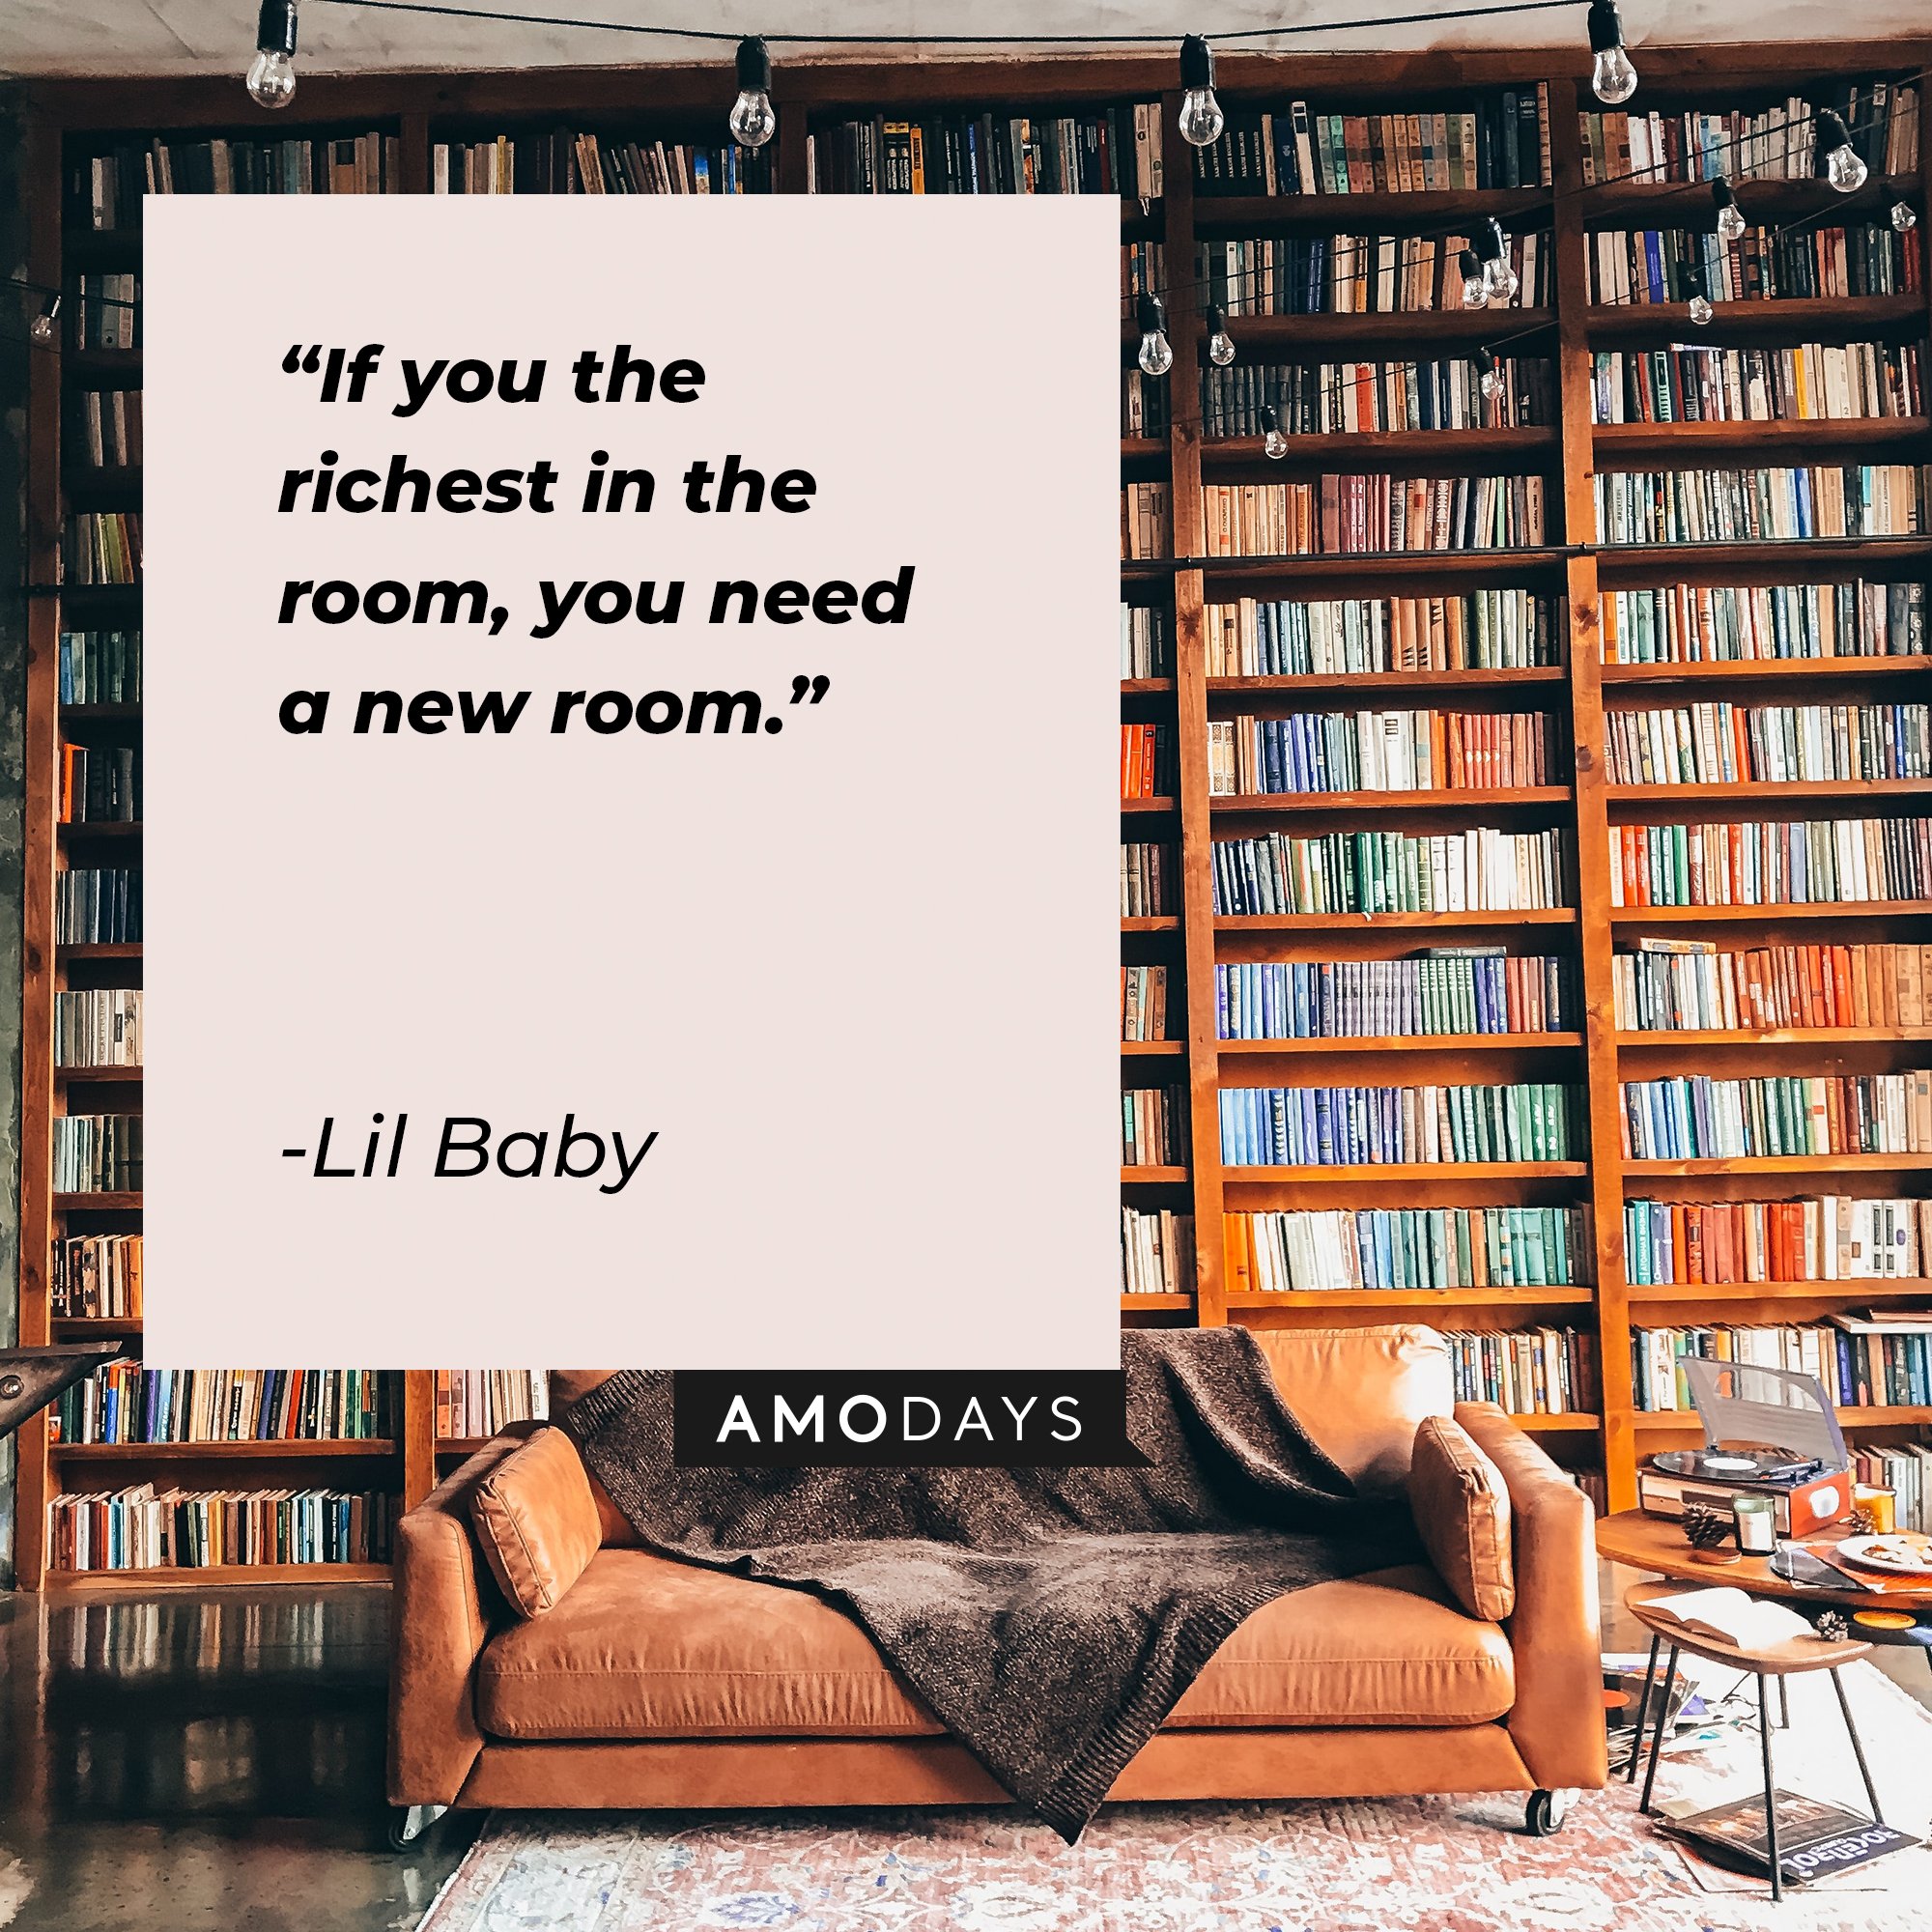 Lil Baby’s quote: "If you the richest in the room, you need a new room."  | Image: AmoDays